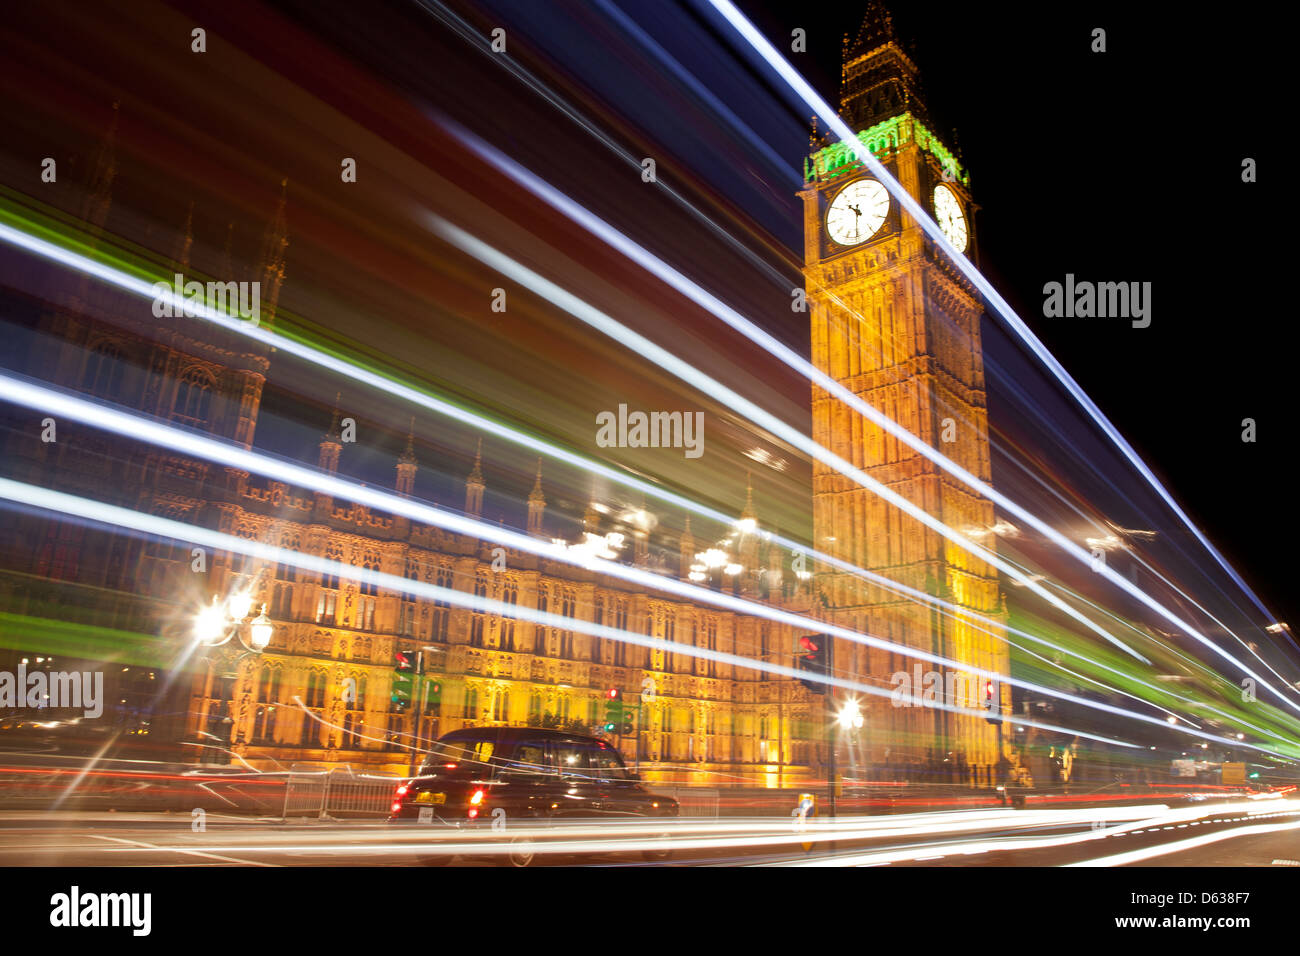 A night scene which shows a taxi by Big Ben clock, while light streaks are made by a passing bus, done by a long exposure effect Stock Photo